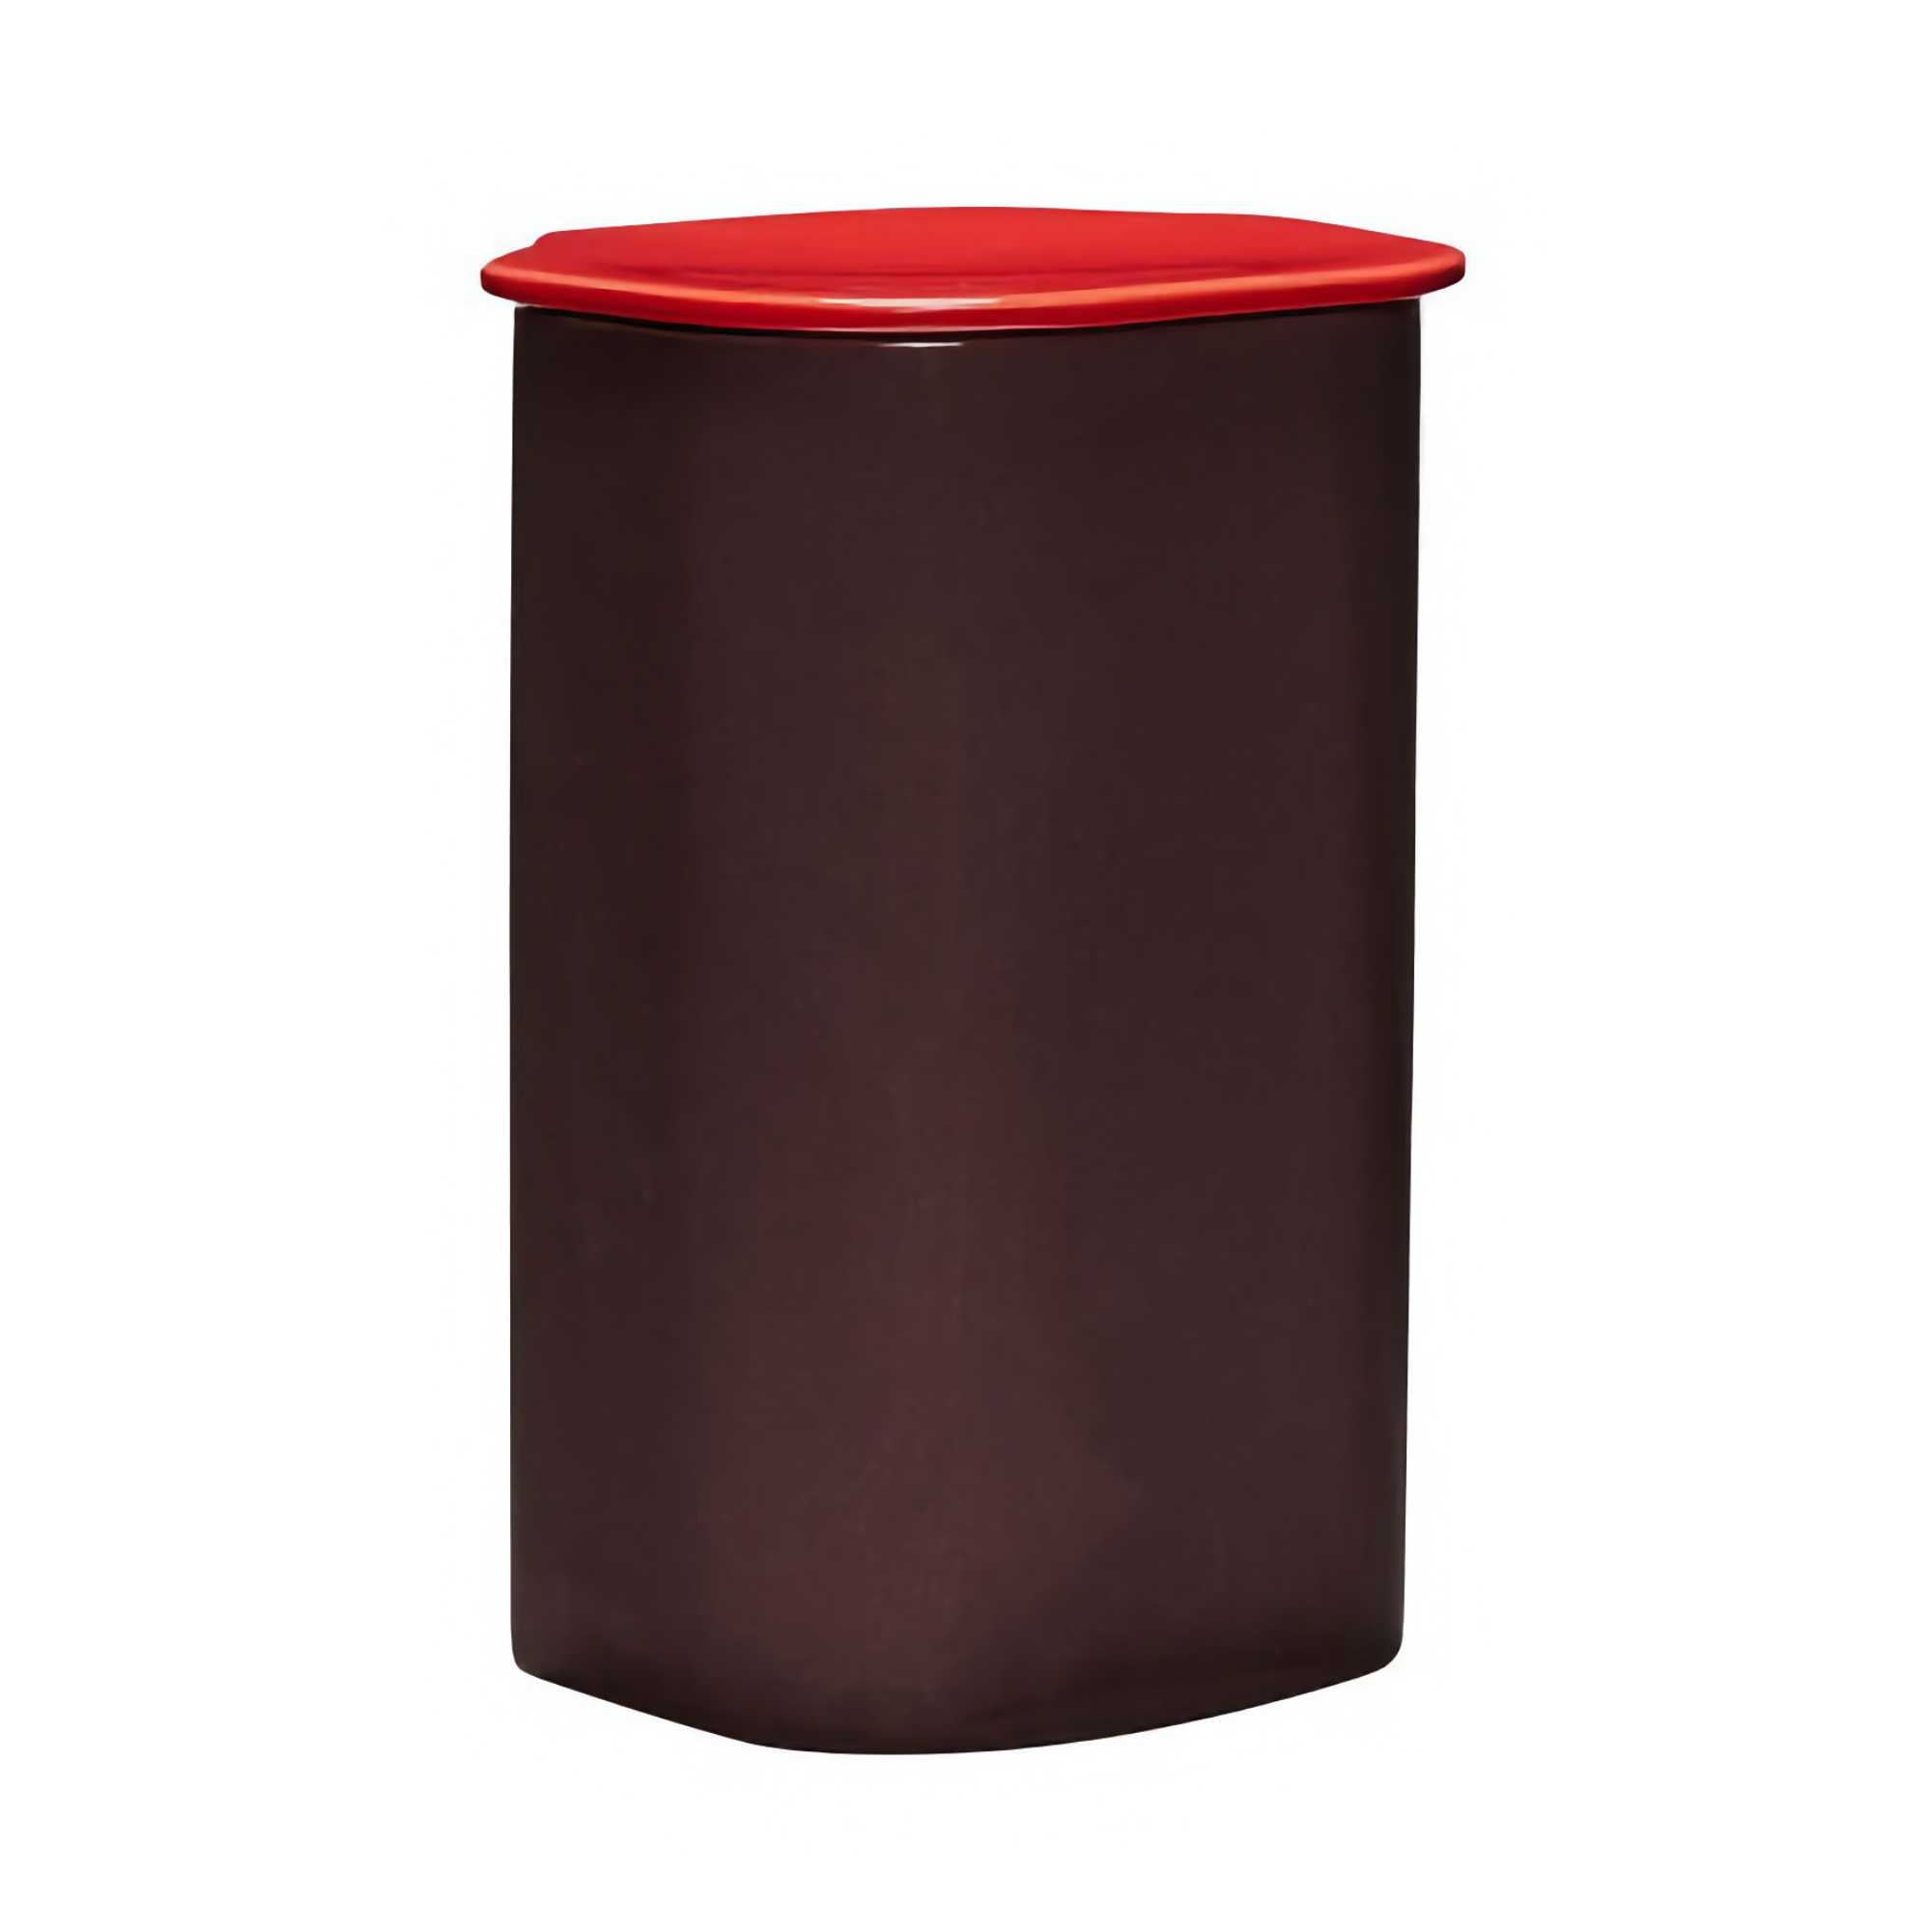 Hubsch Amare Canister with Lid Large, Burgundy/Red